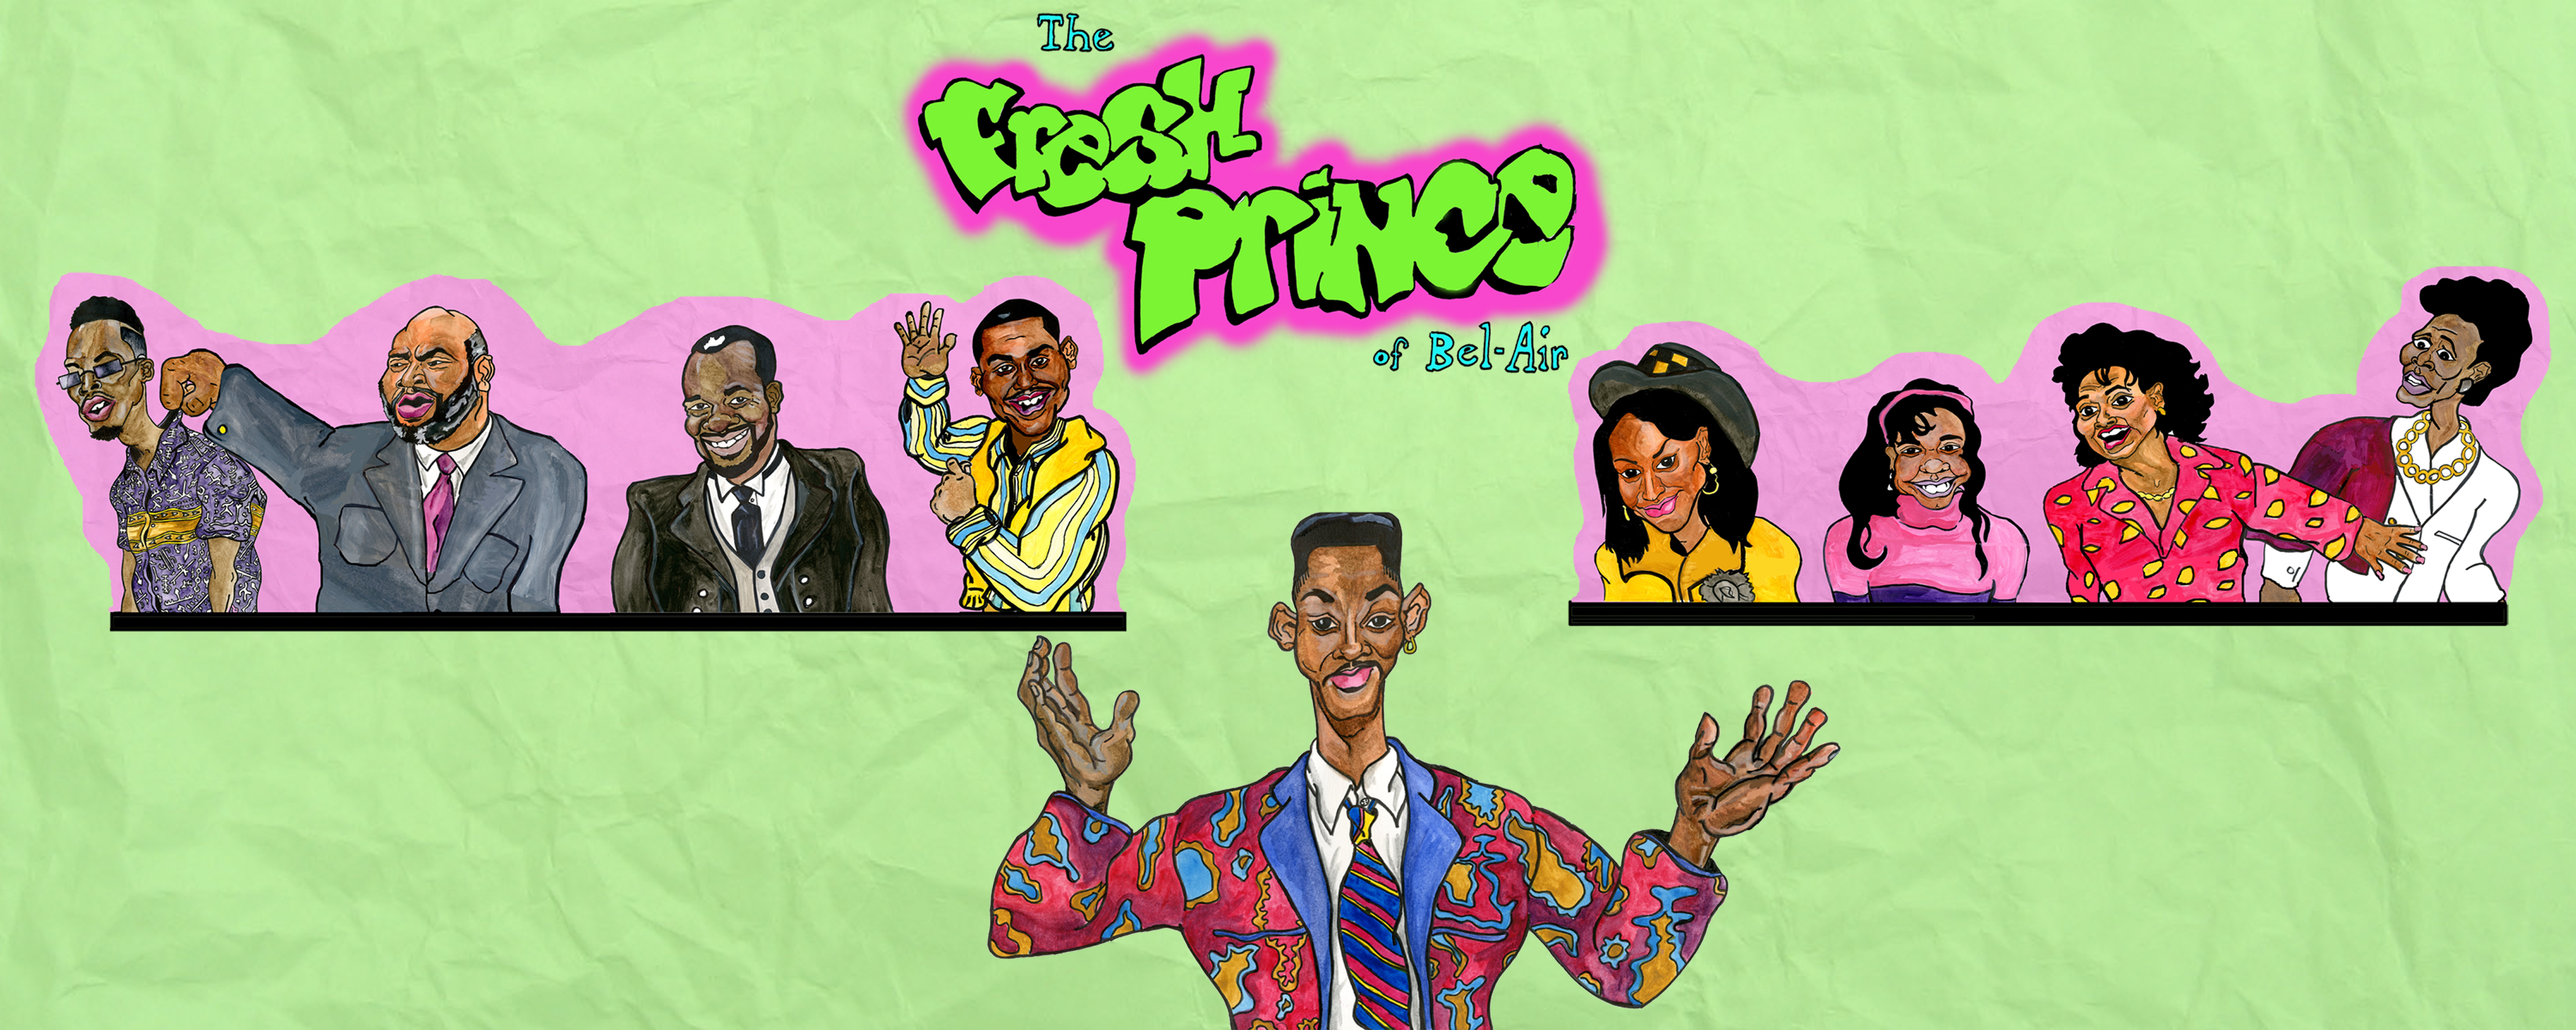 Latest The Fresh Prince of Bel Air Desktop Wallpapers